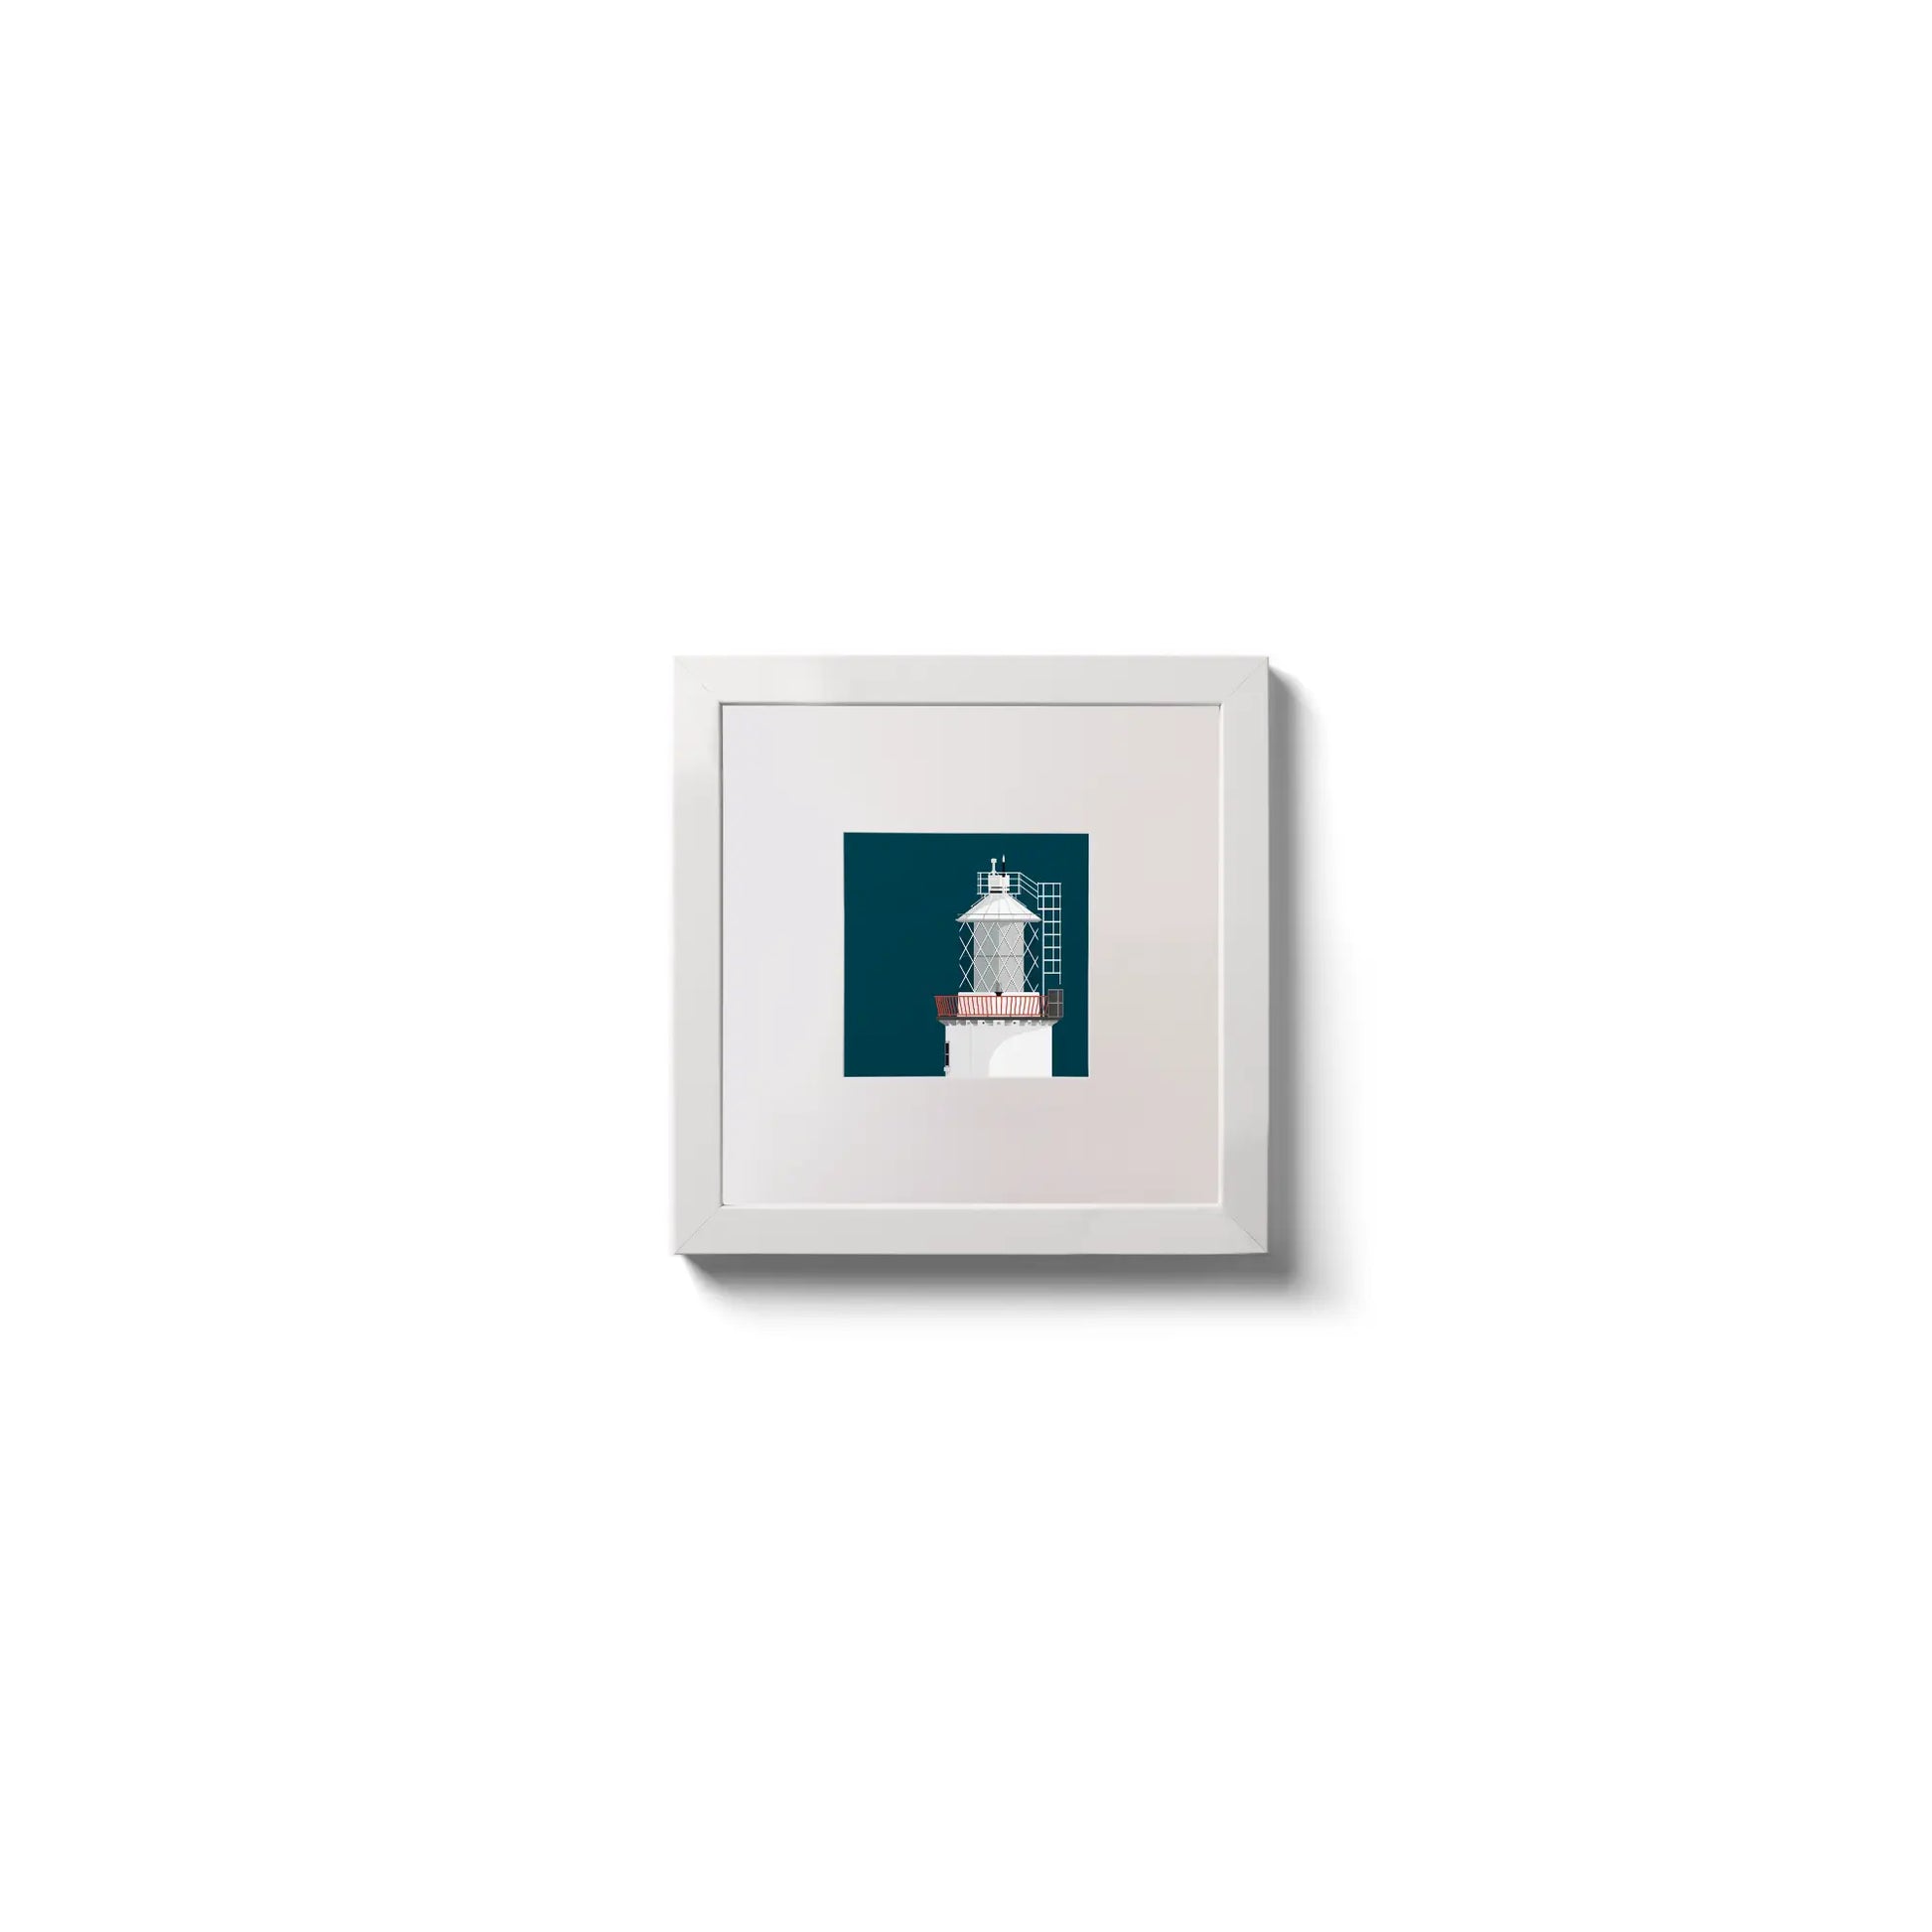 Illustration of The Maidens lighthouse on a midnight blue background,  in a white square frame measuring 10x10cm.